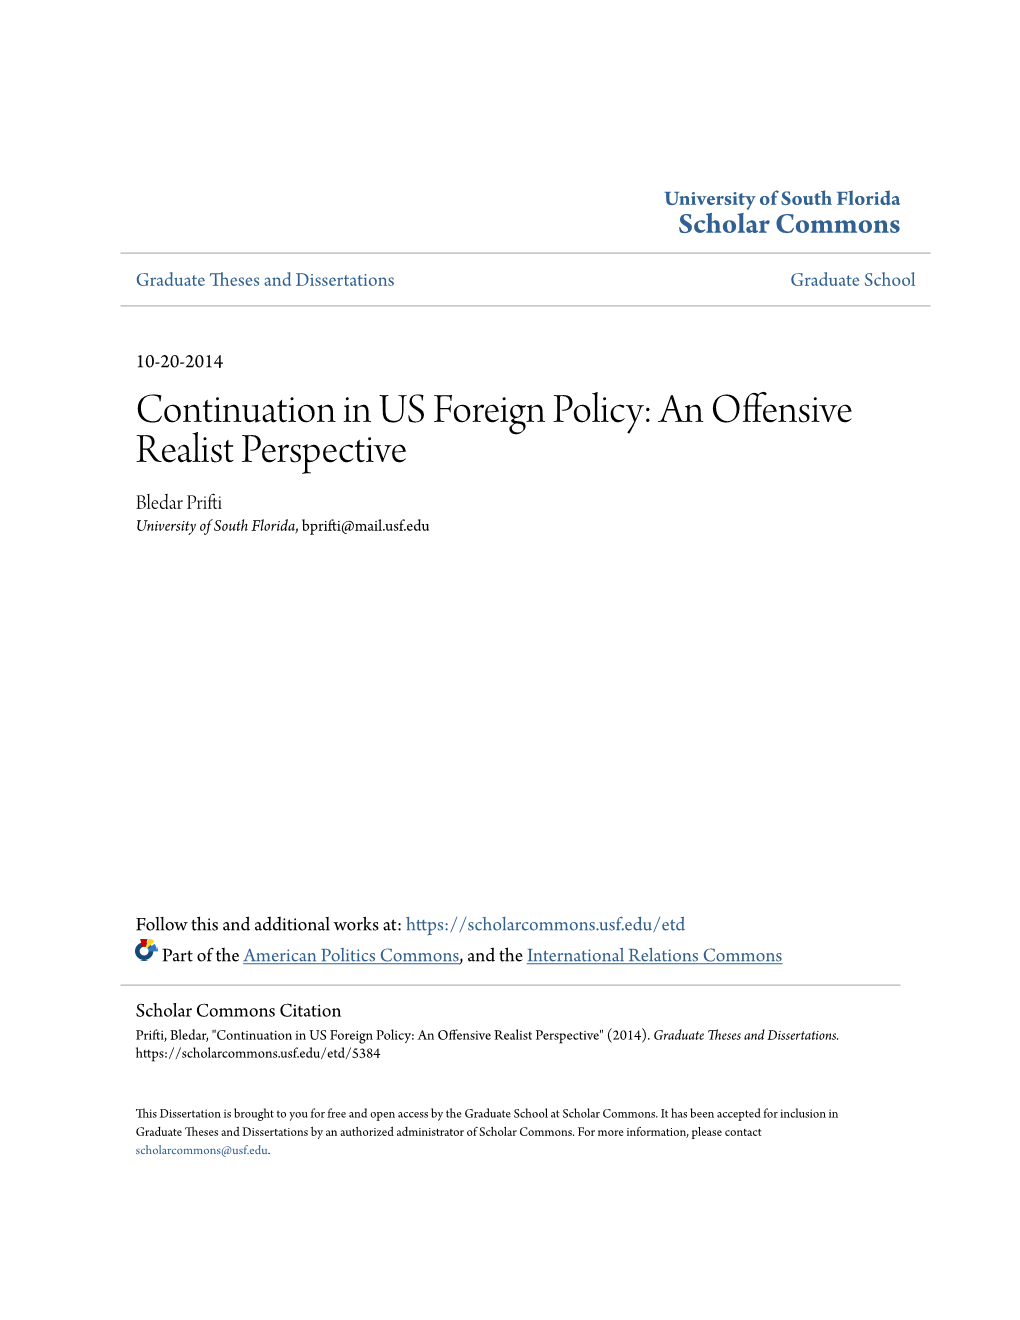 Continuation in US Foreign Policy: an Offensive Realist Perspective Bledar Prifti University of South Florida, Bprifti@Mail.Usf.Edu